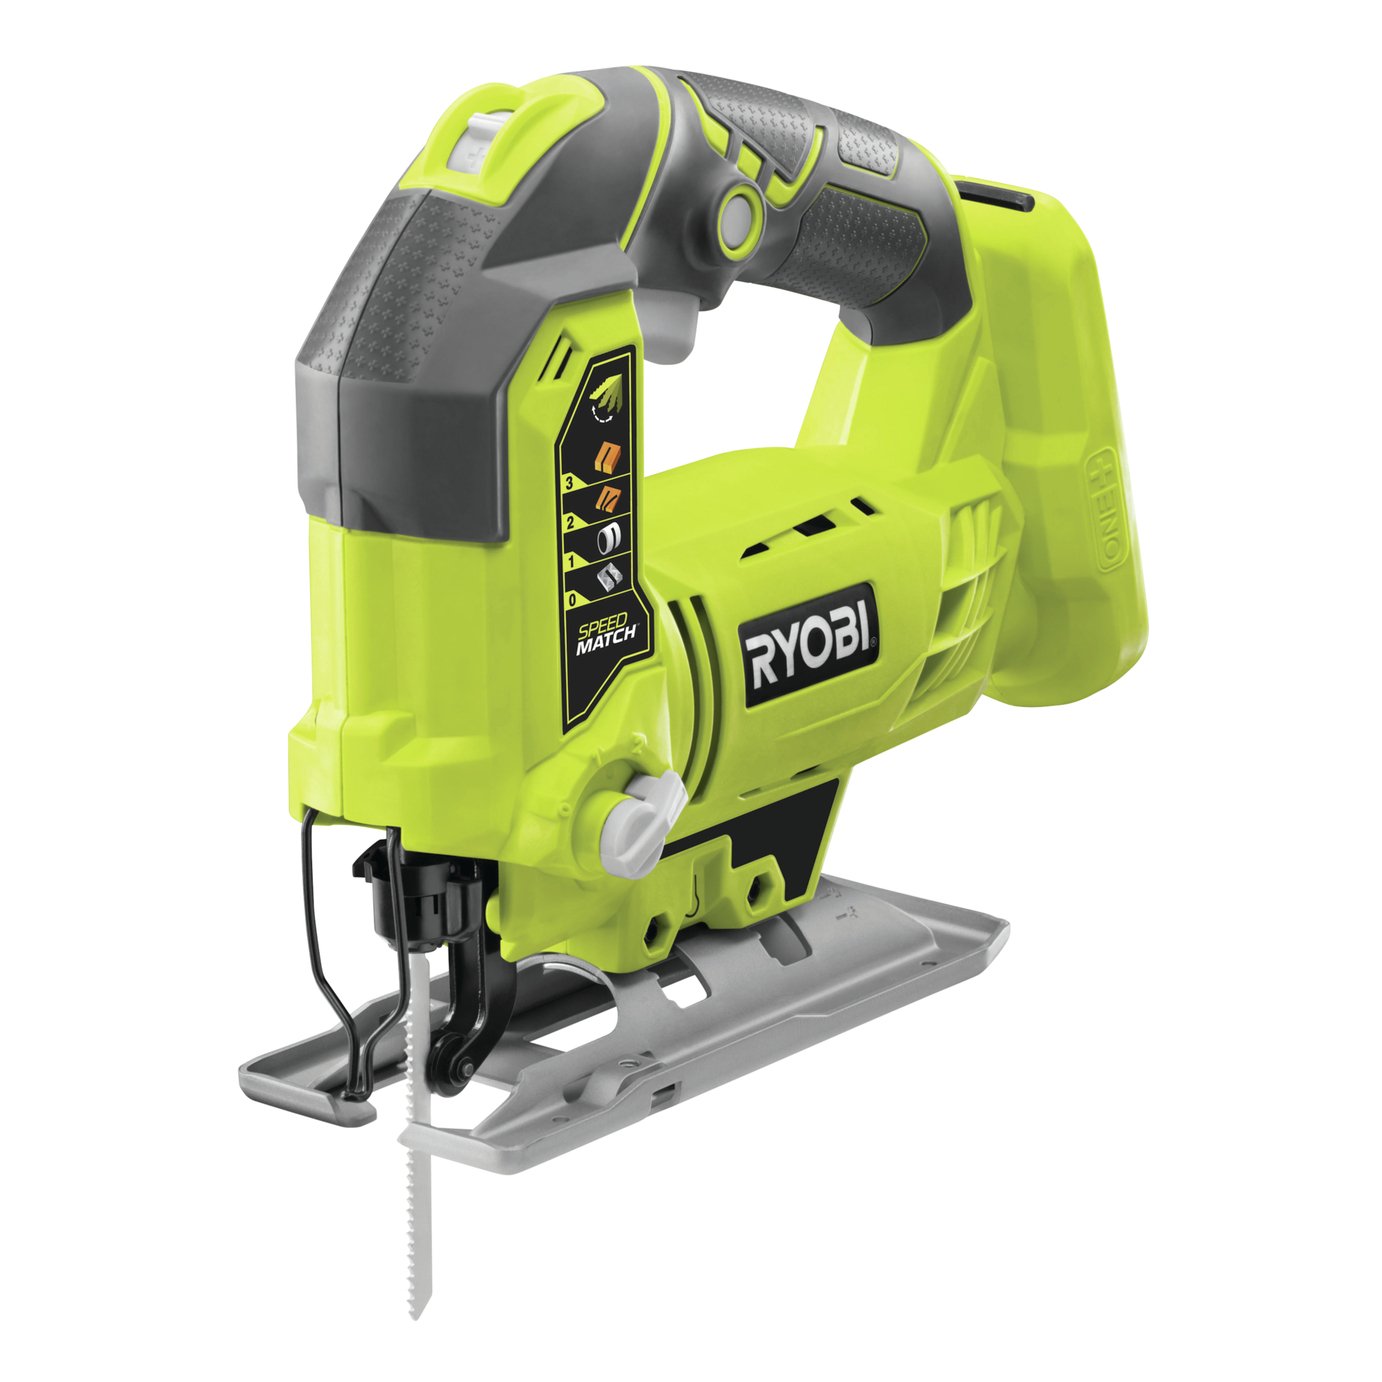 Ryobi R18JS-0 Cordless Jigsaw with 2Ah Battery & Charger Review